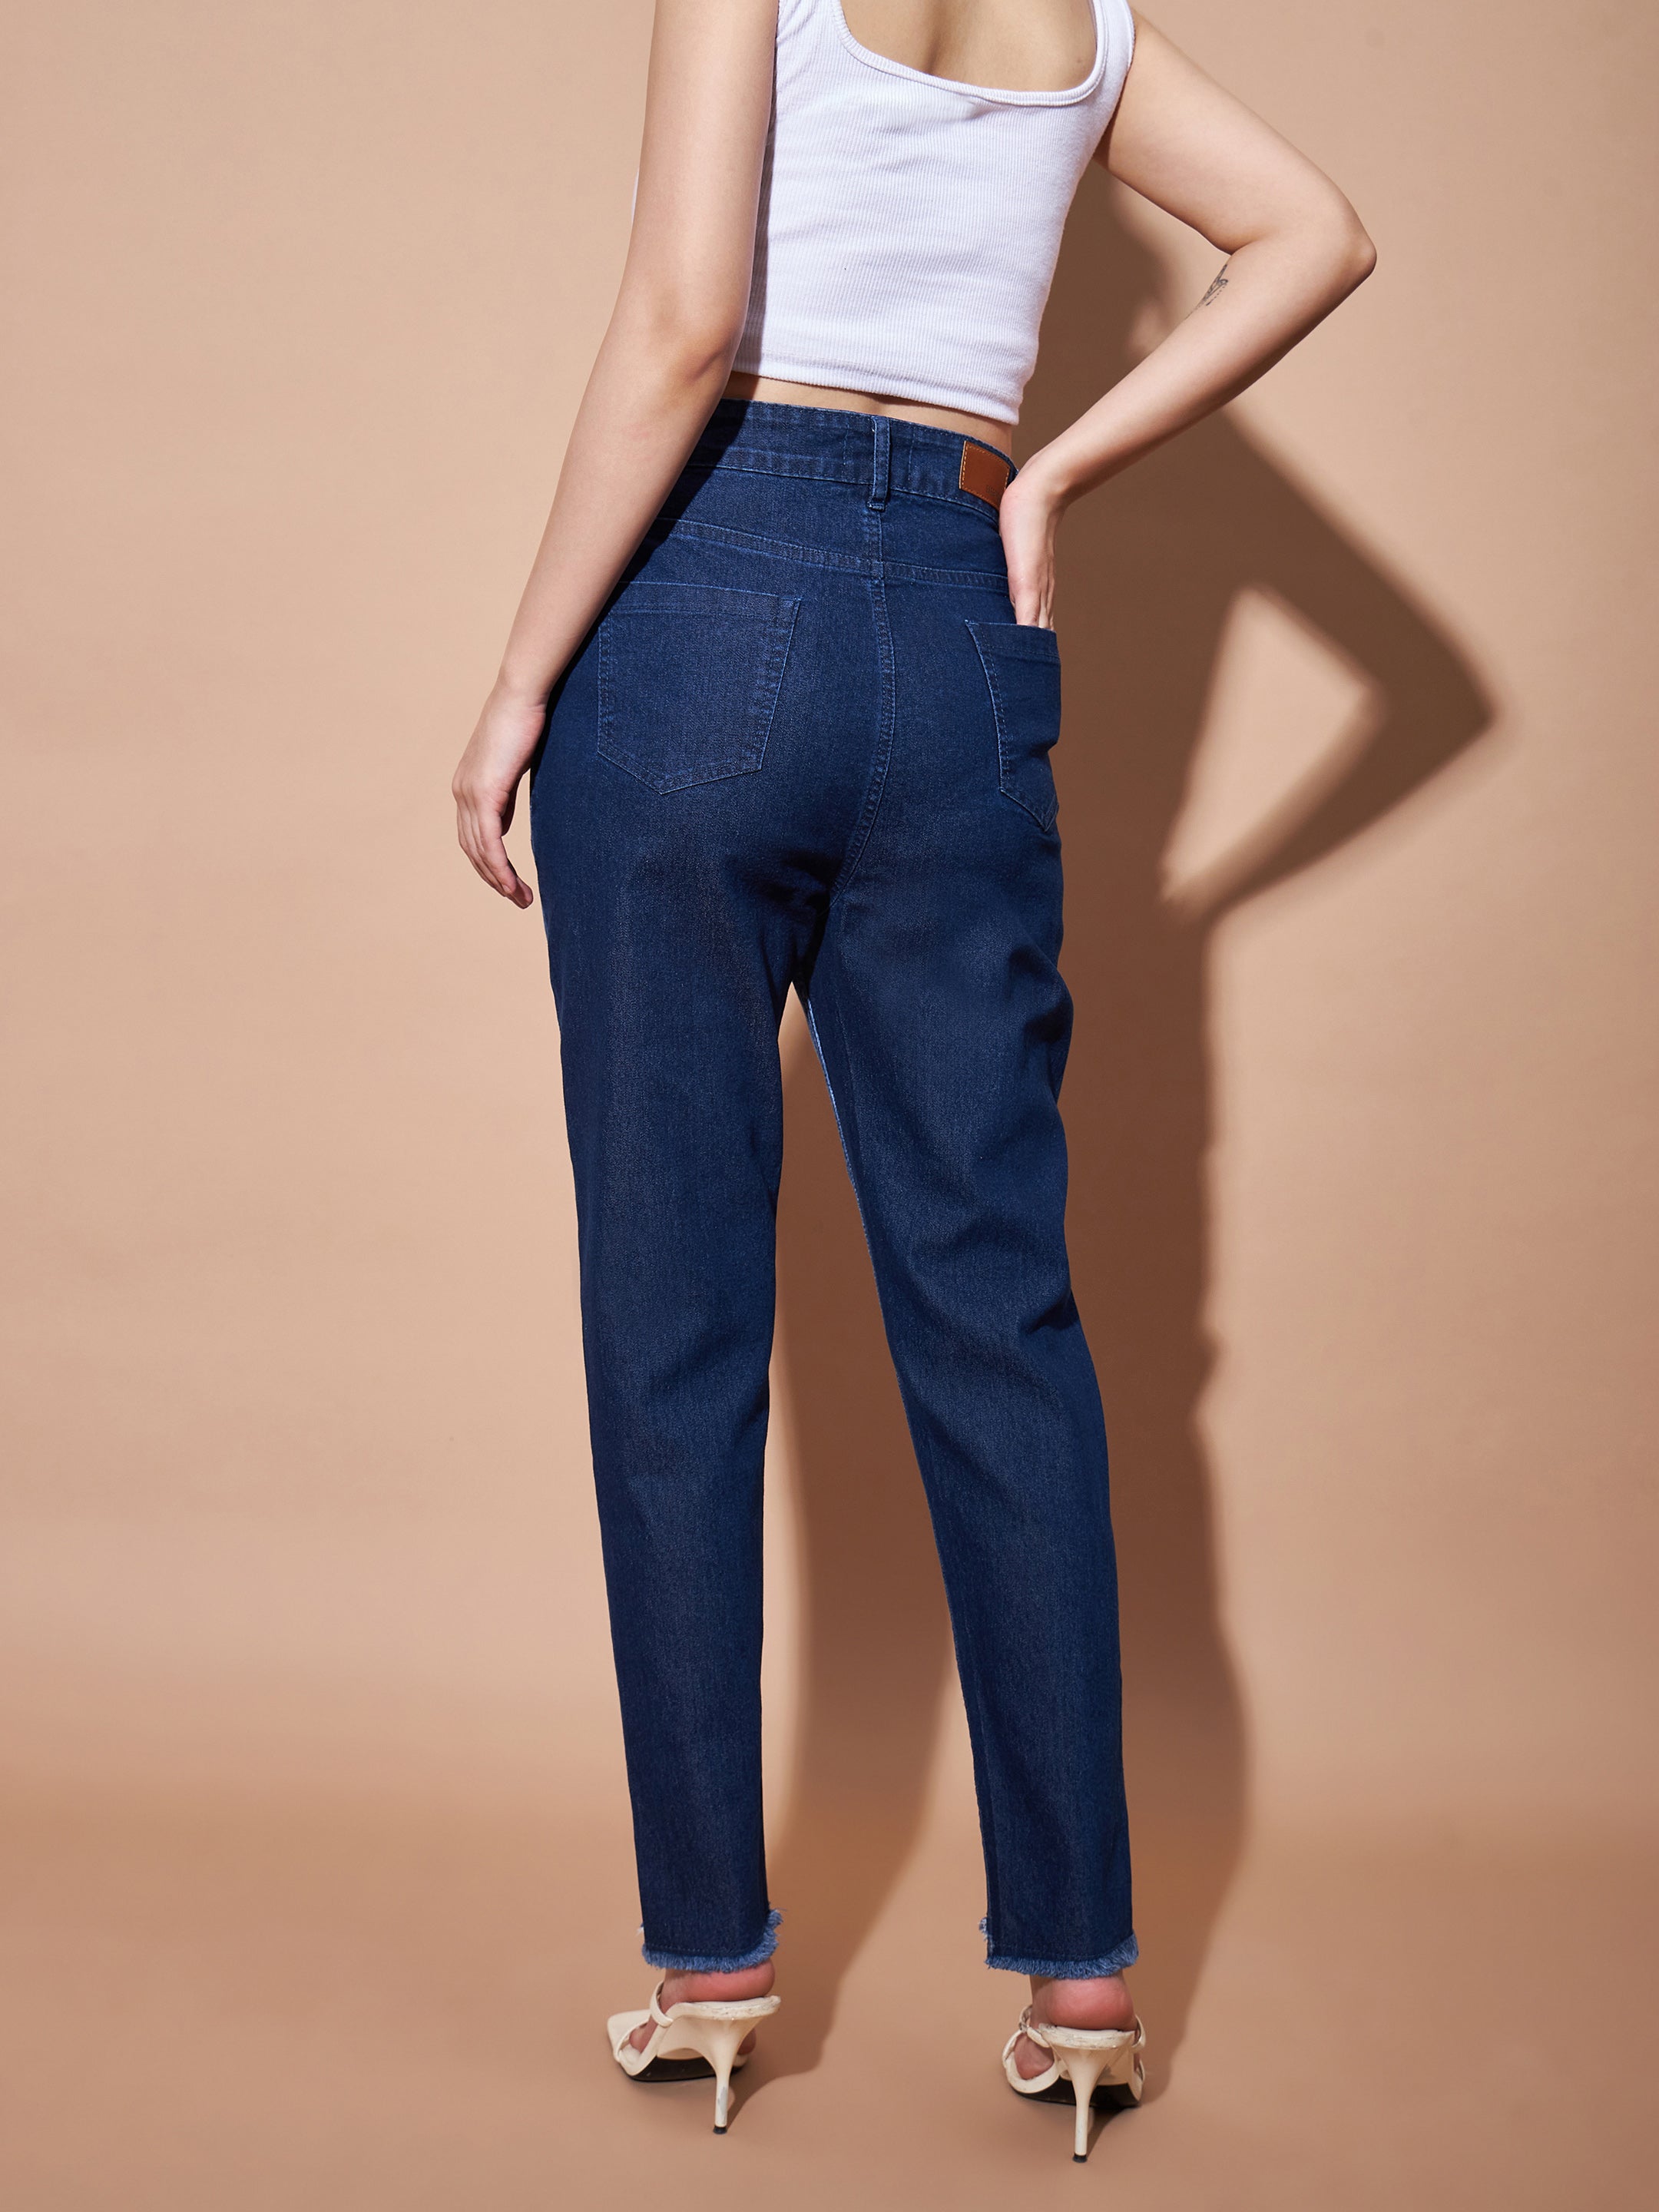 Women's Blue High Waisted Slim Fit Frayed Jeans - Lyush